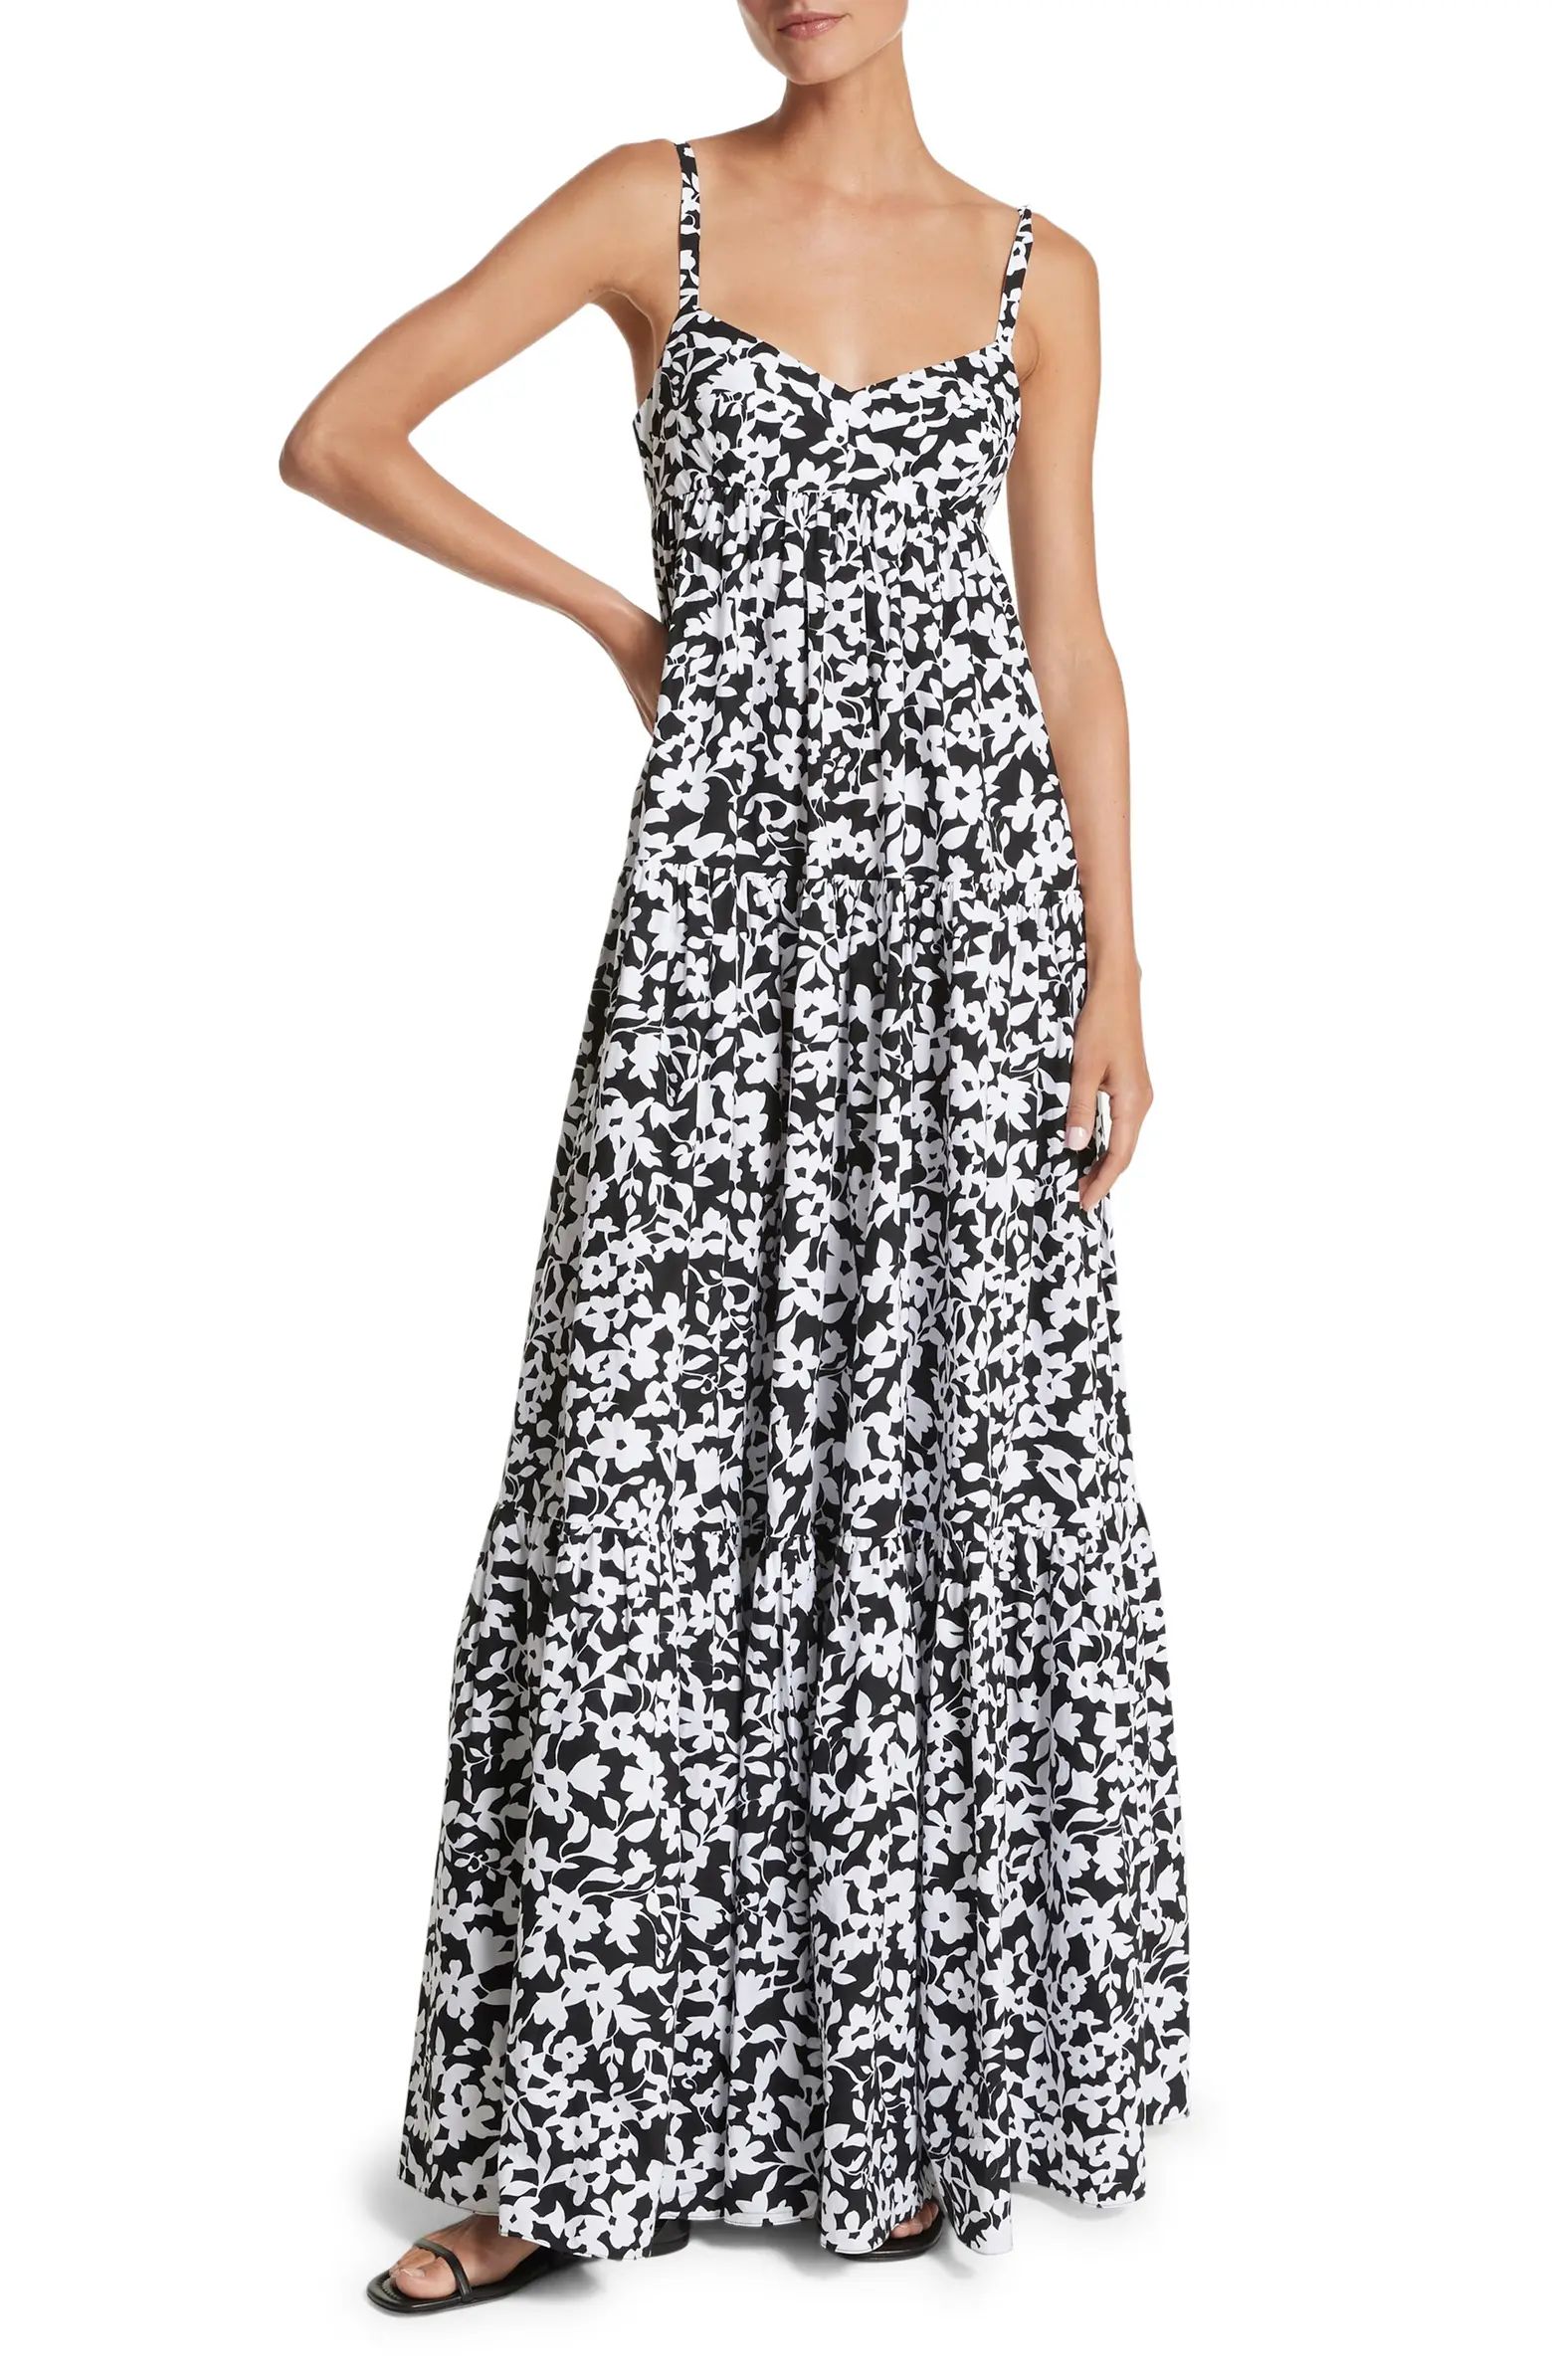 Michael Kors Collection Floral Print Tiered Cotton Poplin Maxi Dress | Nordstrom | Nordstrom